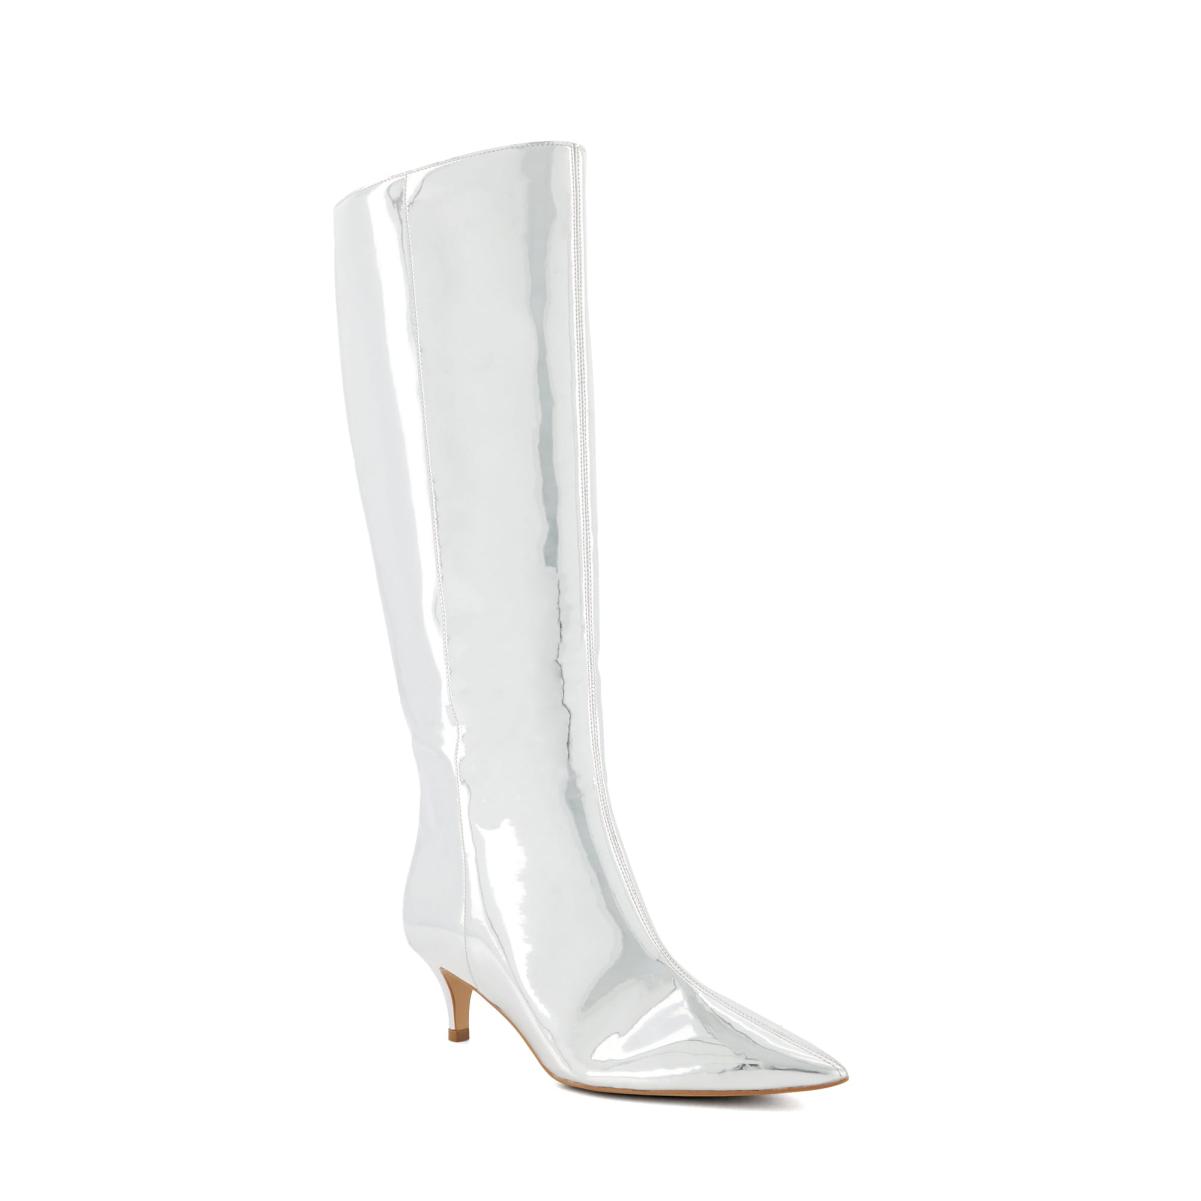 Smooth - Silver Dune London Knee High Boots Women - 4